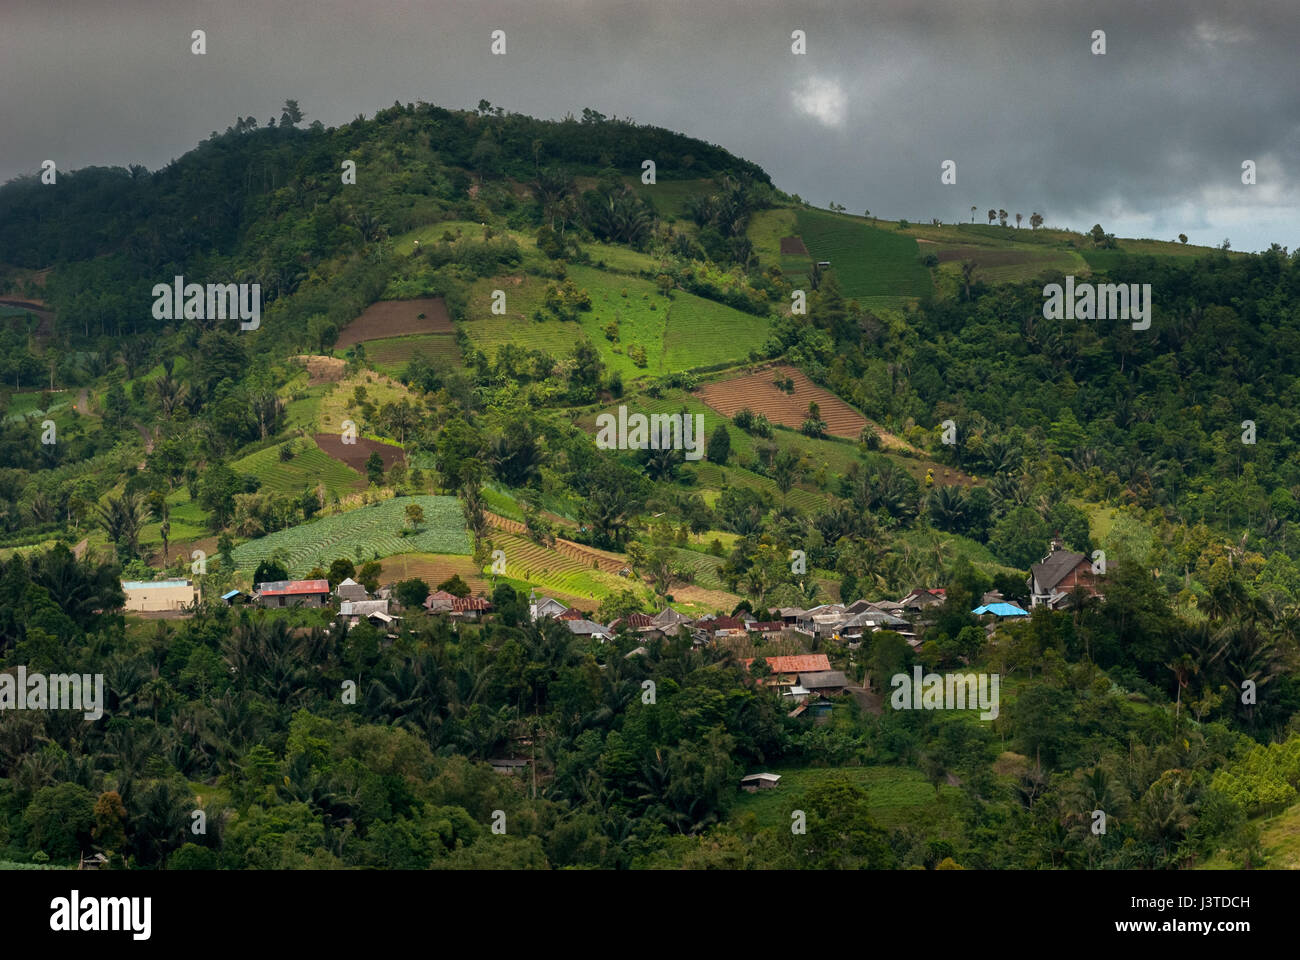 Landscape of a hill village and agricultural land in North Sulawesi, Indonesia. Stock Photo